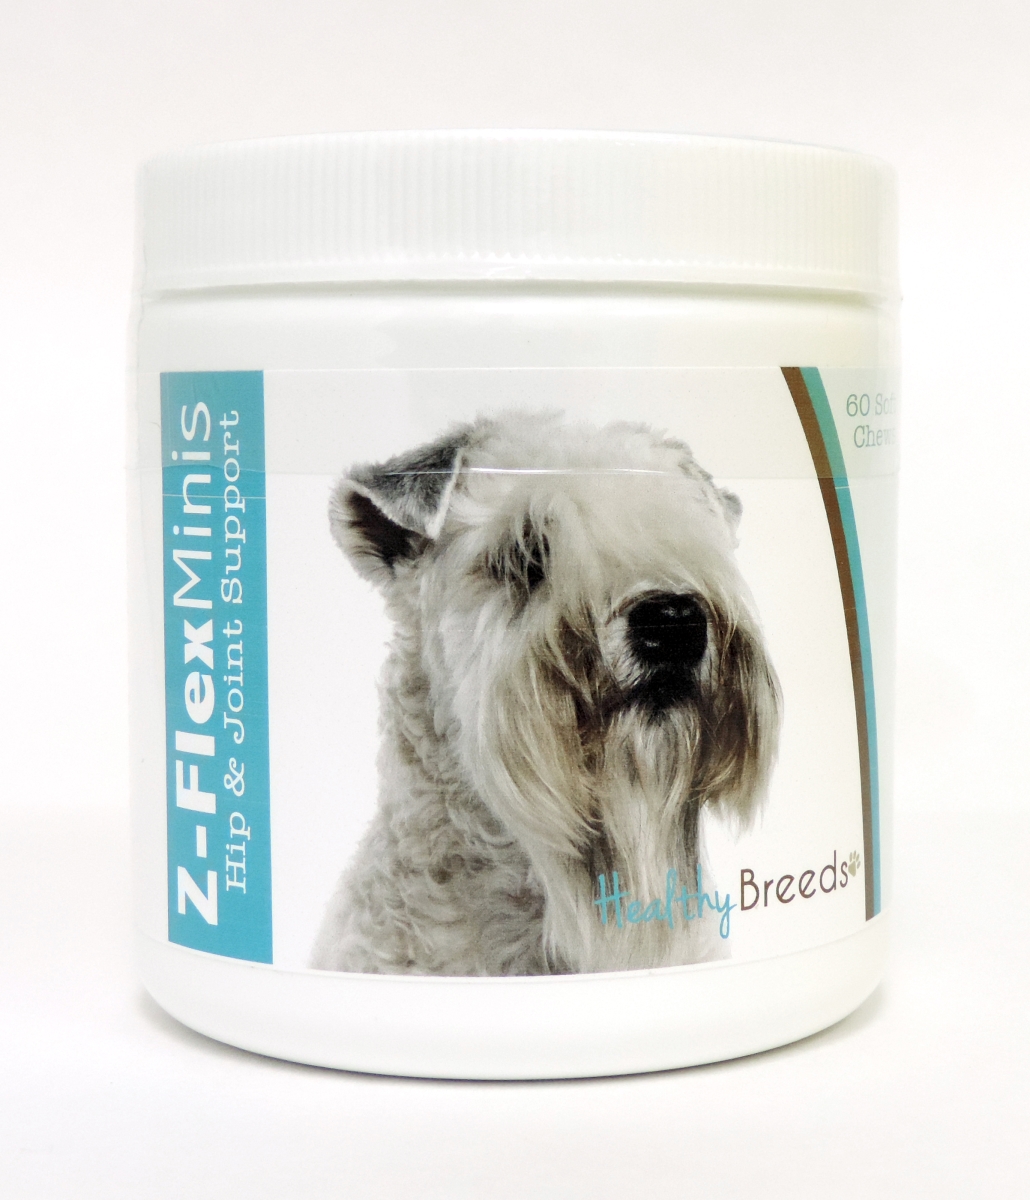 840235114055 Soft Coated Wheaten Terrier Z-flex Minis Hip & Joint Support Soft Chews - 60 Count